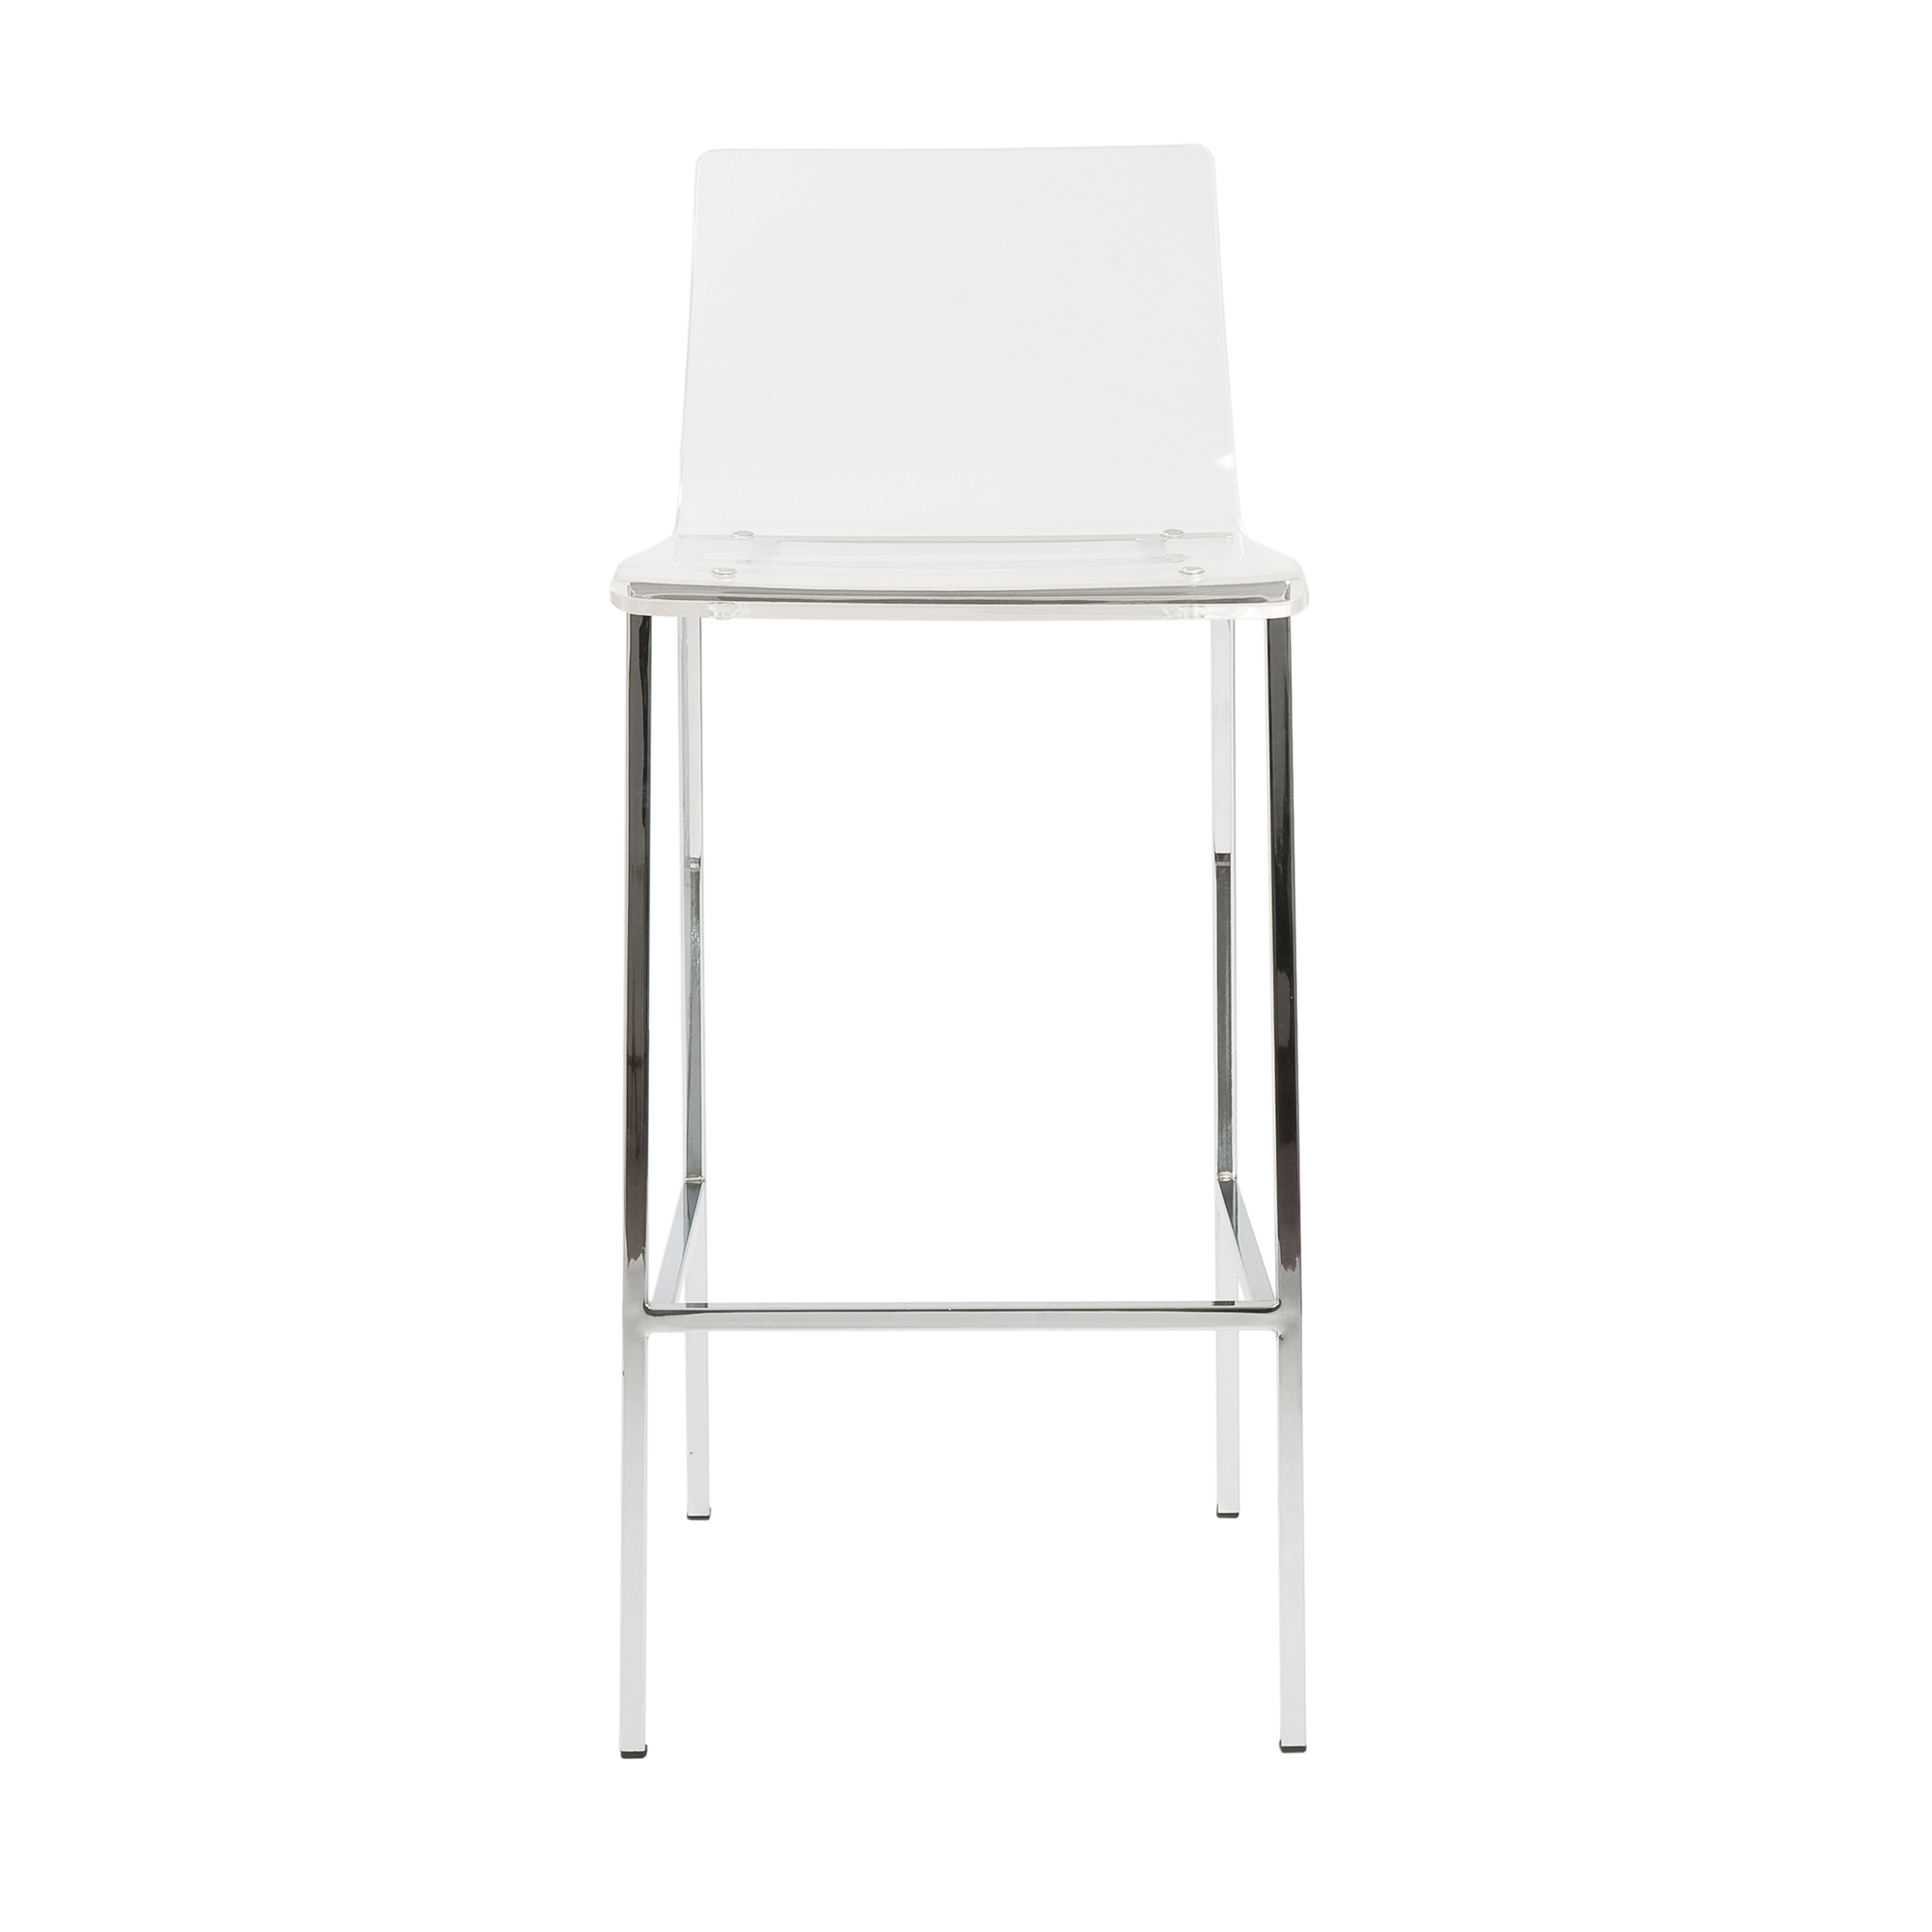 Chloe Bar Stool in half inch thick claear seat and back shown here.